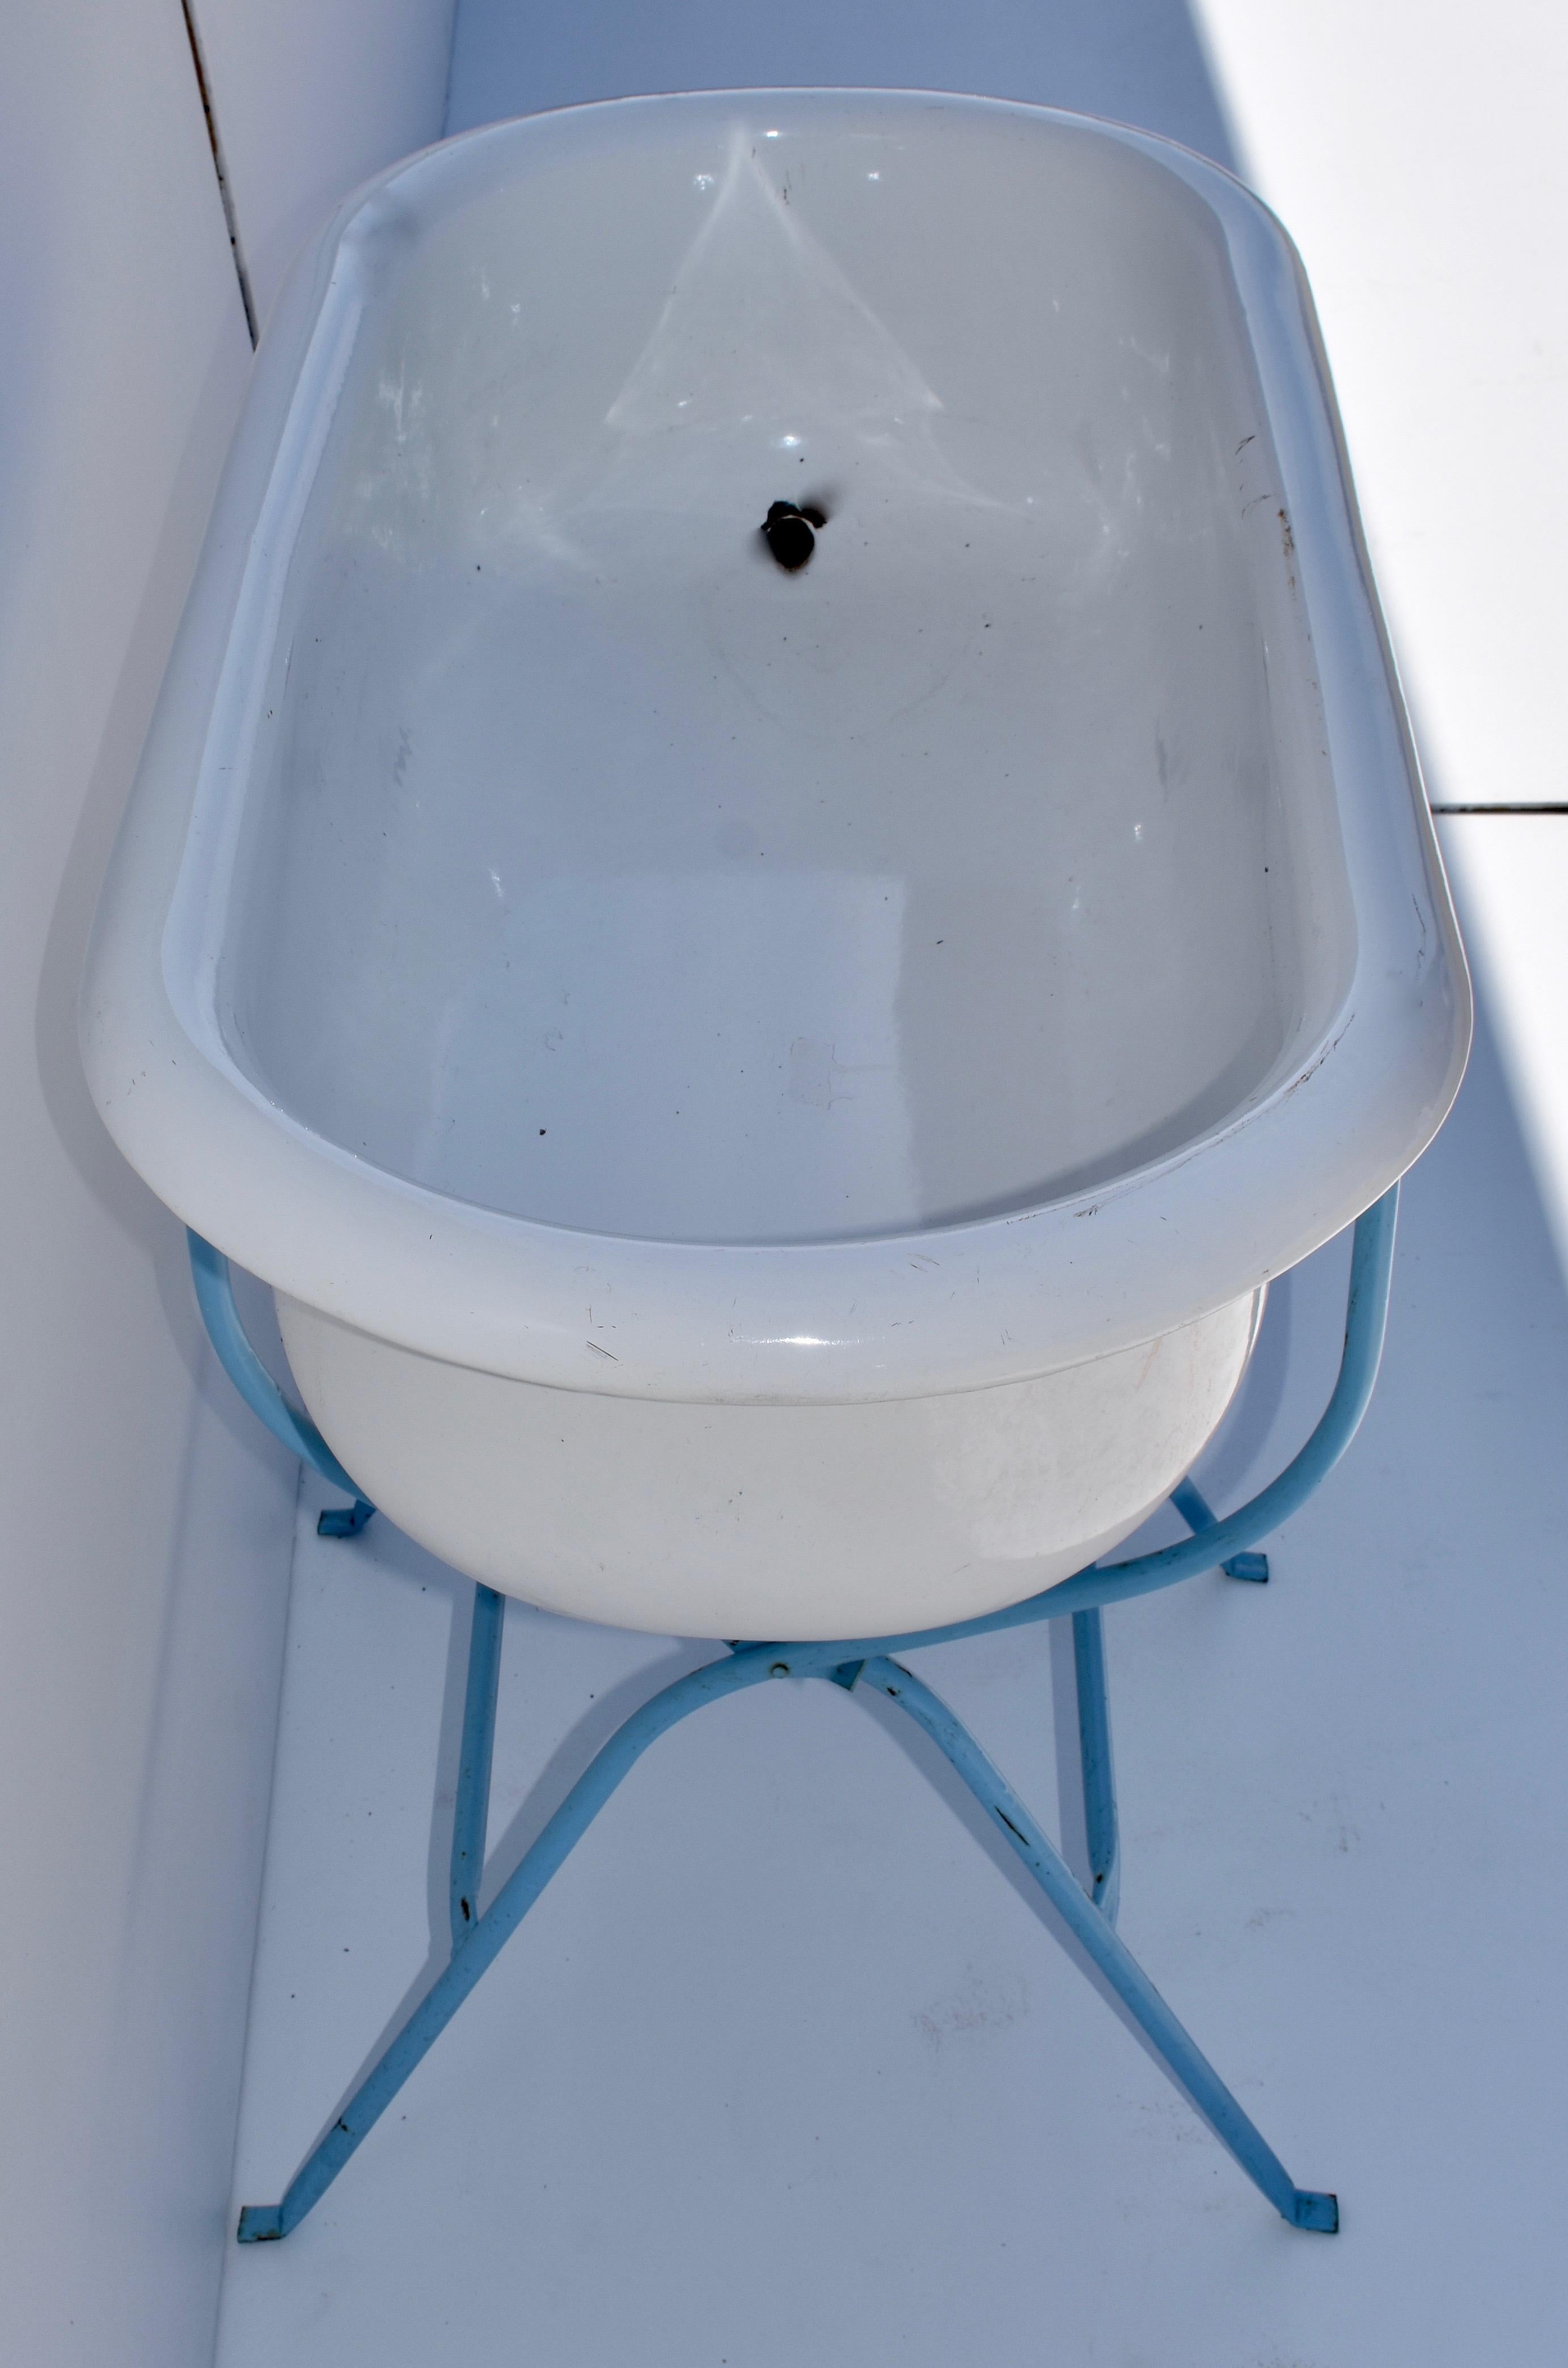 antique baby bathtub with stand